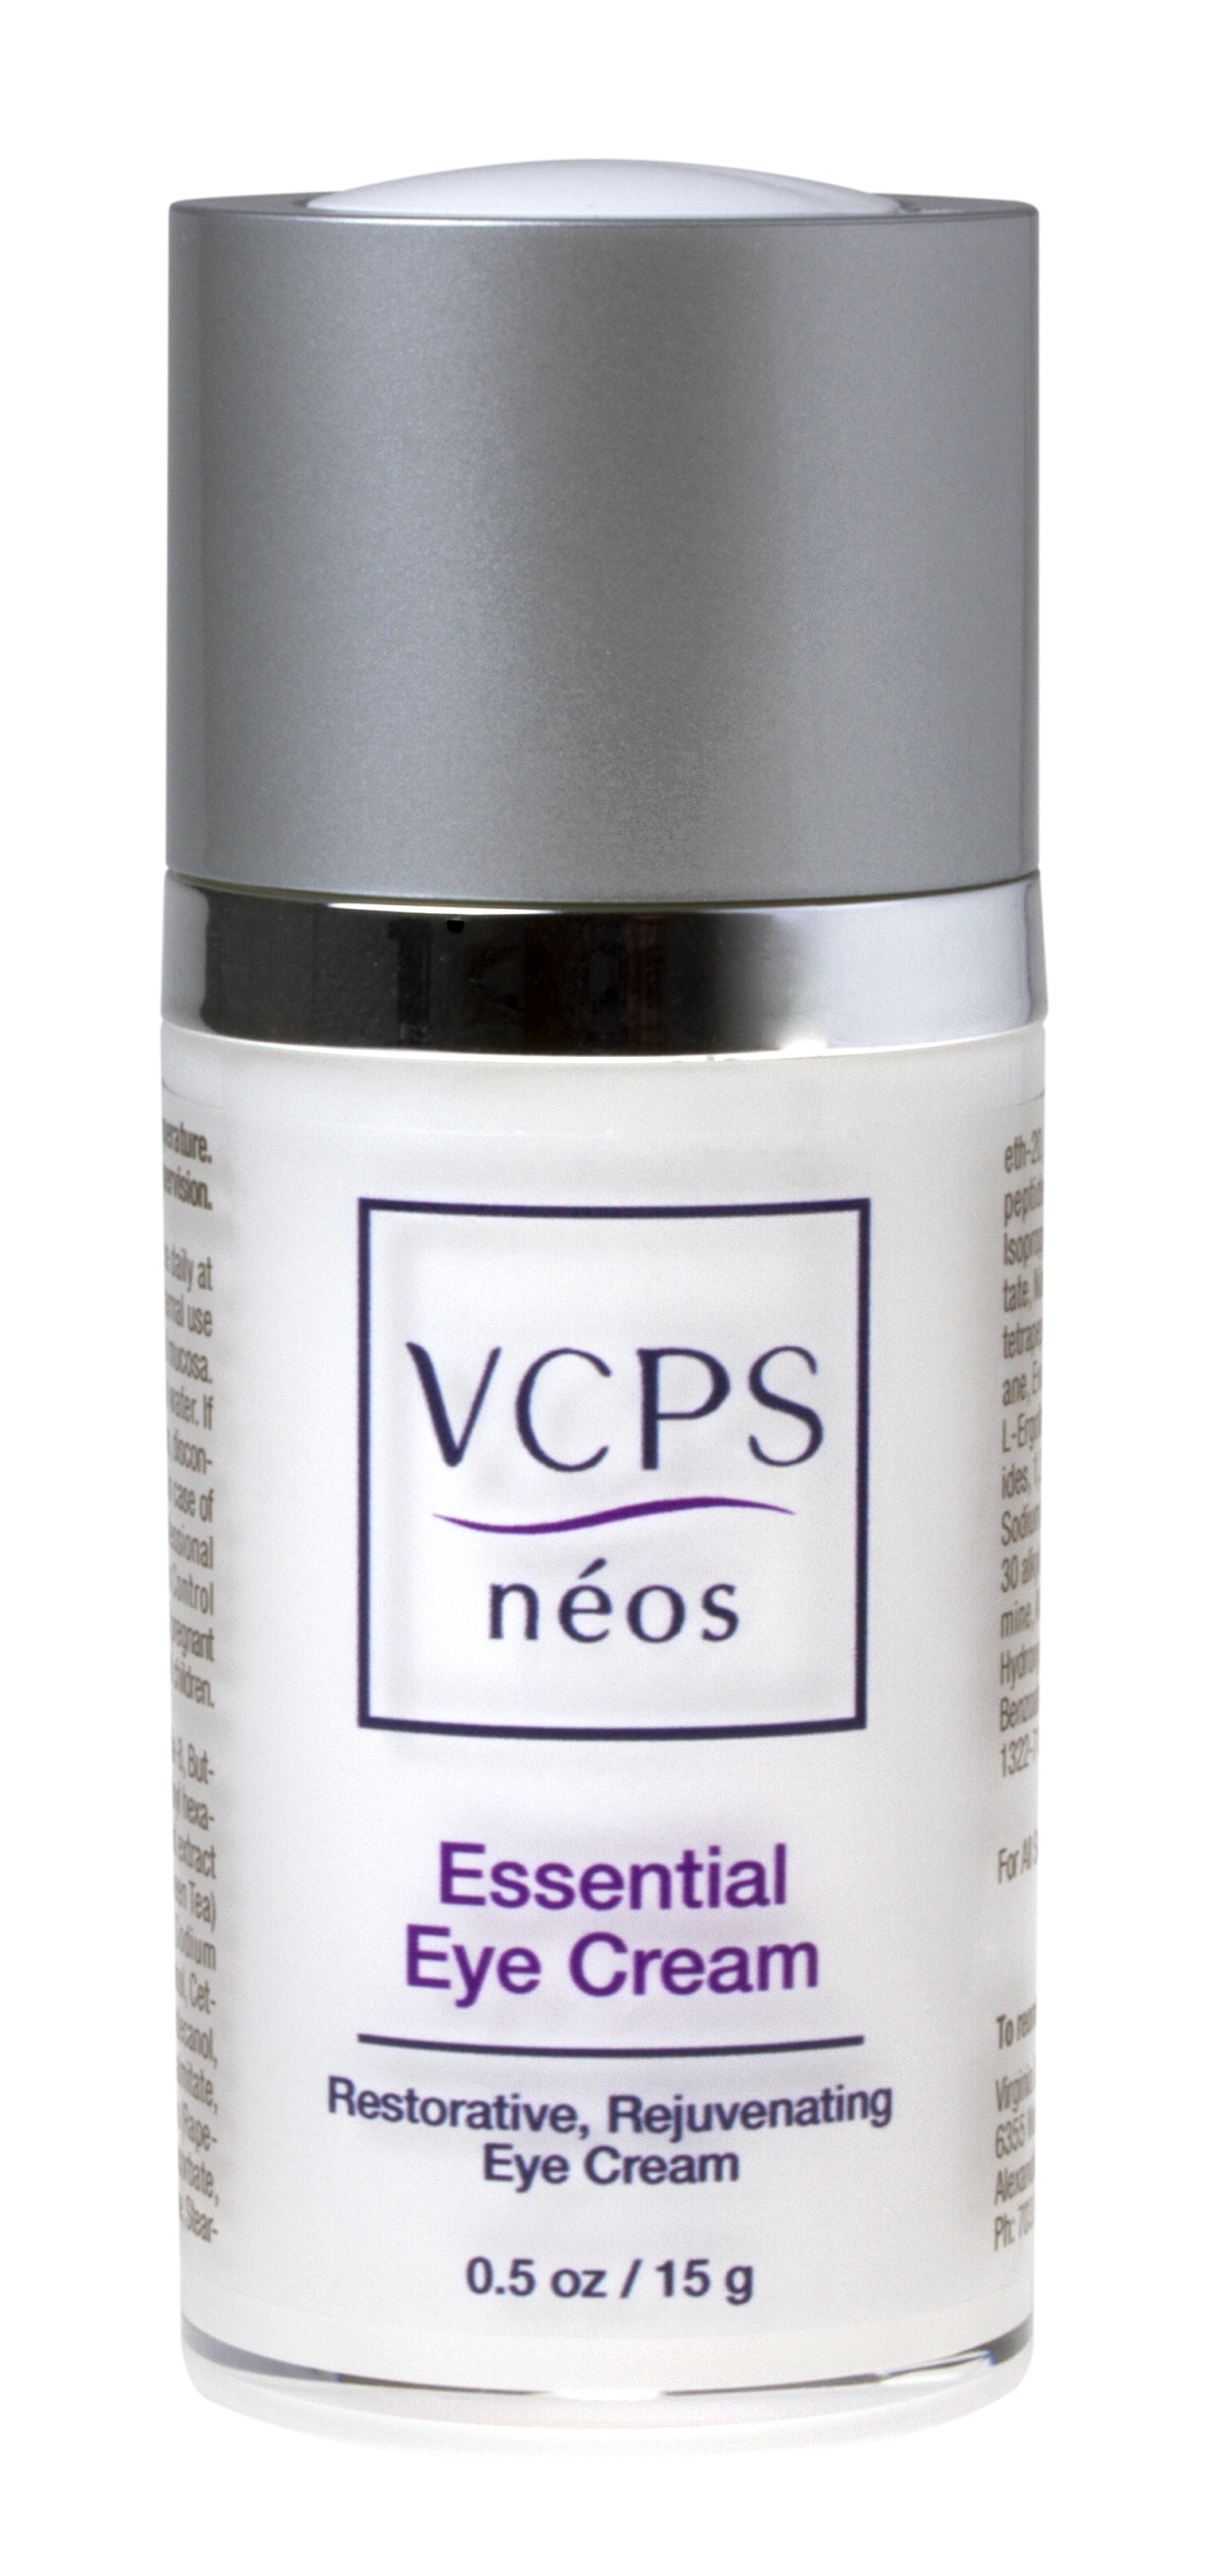 vcps skincare products